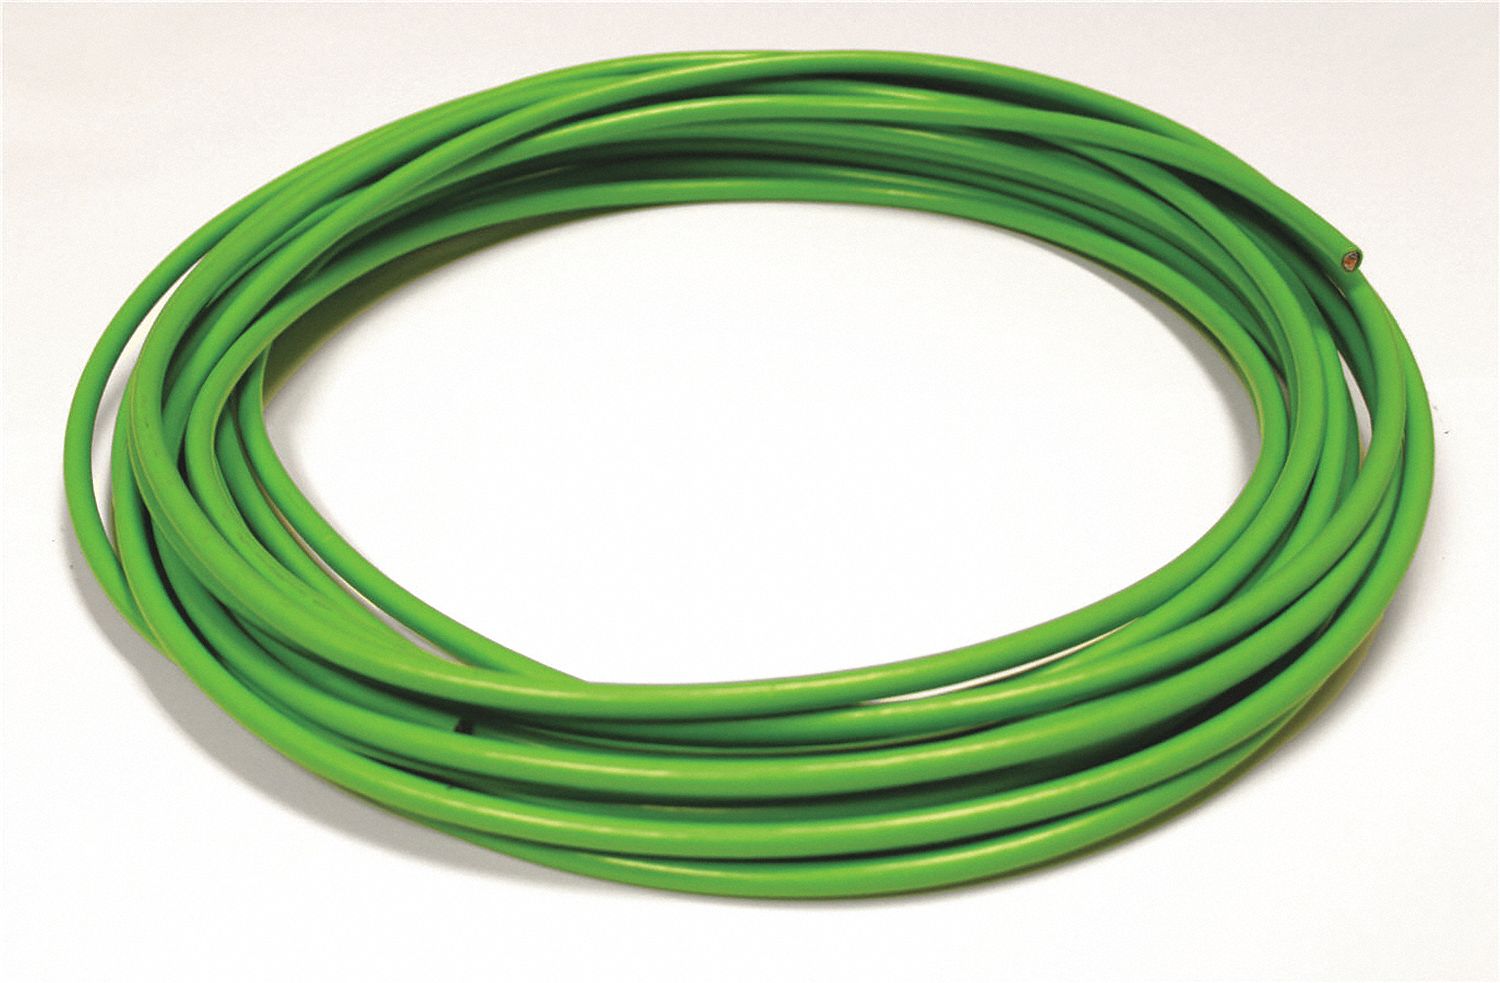 14G842 - Cable Cat 5e 22 AWG 328 ft Green